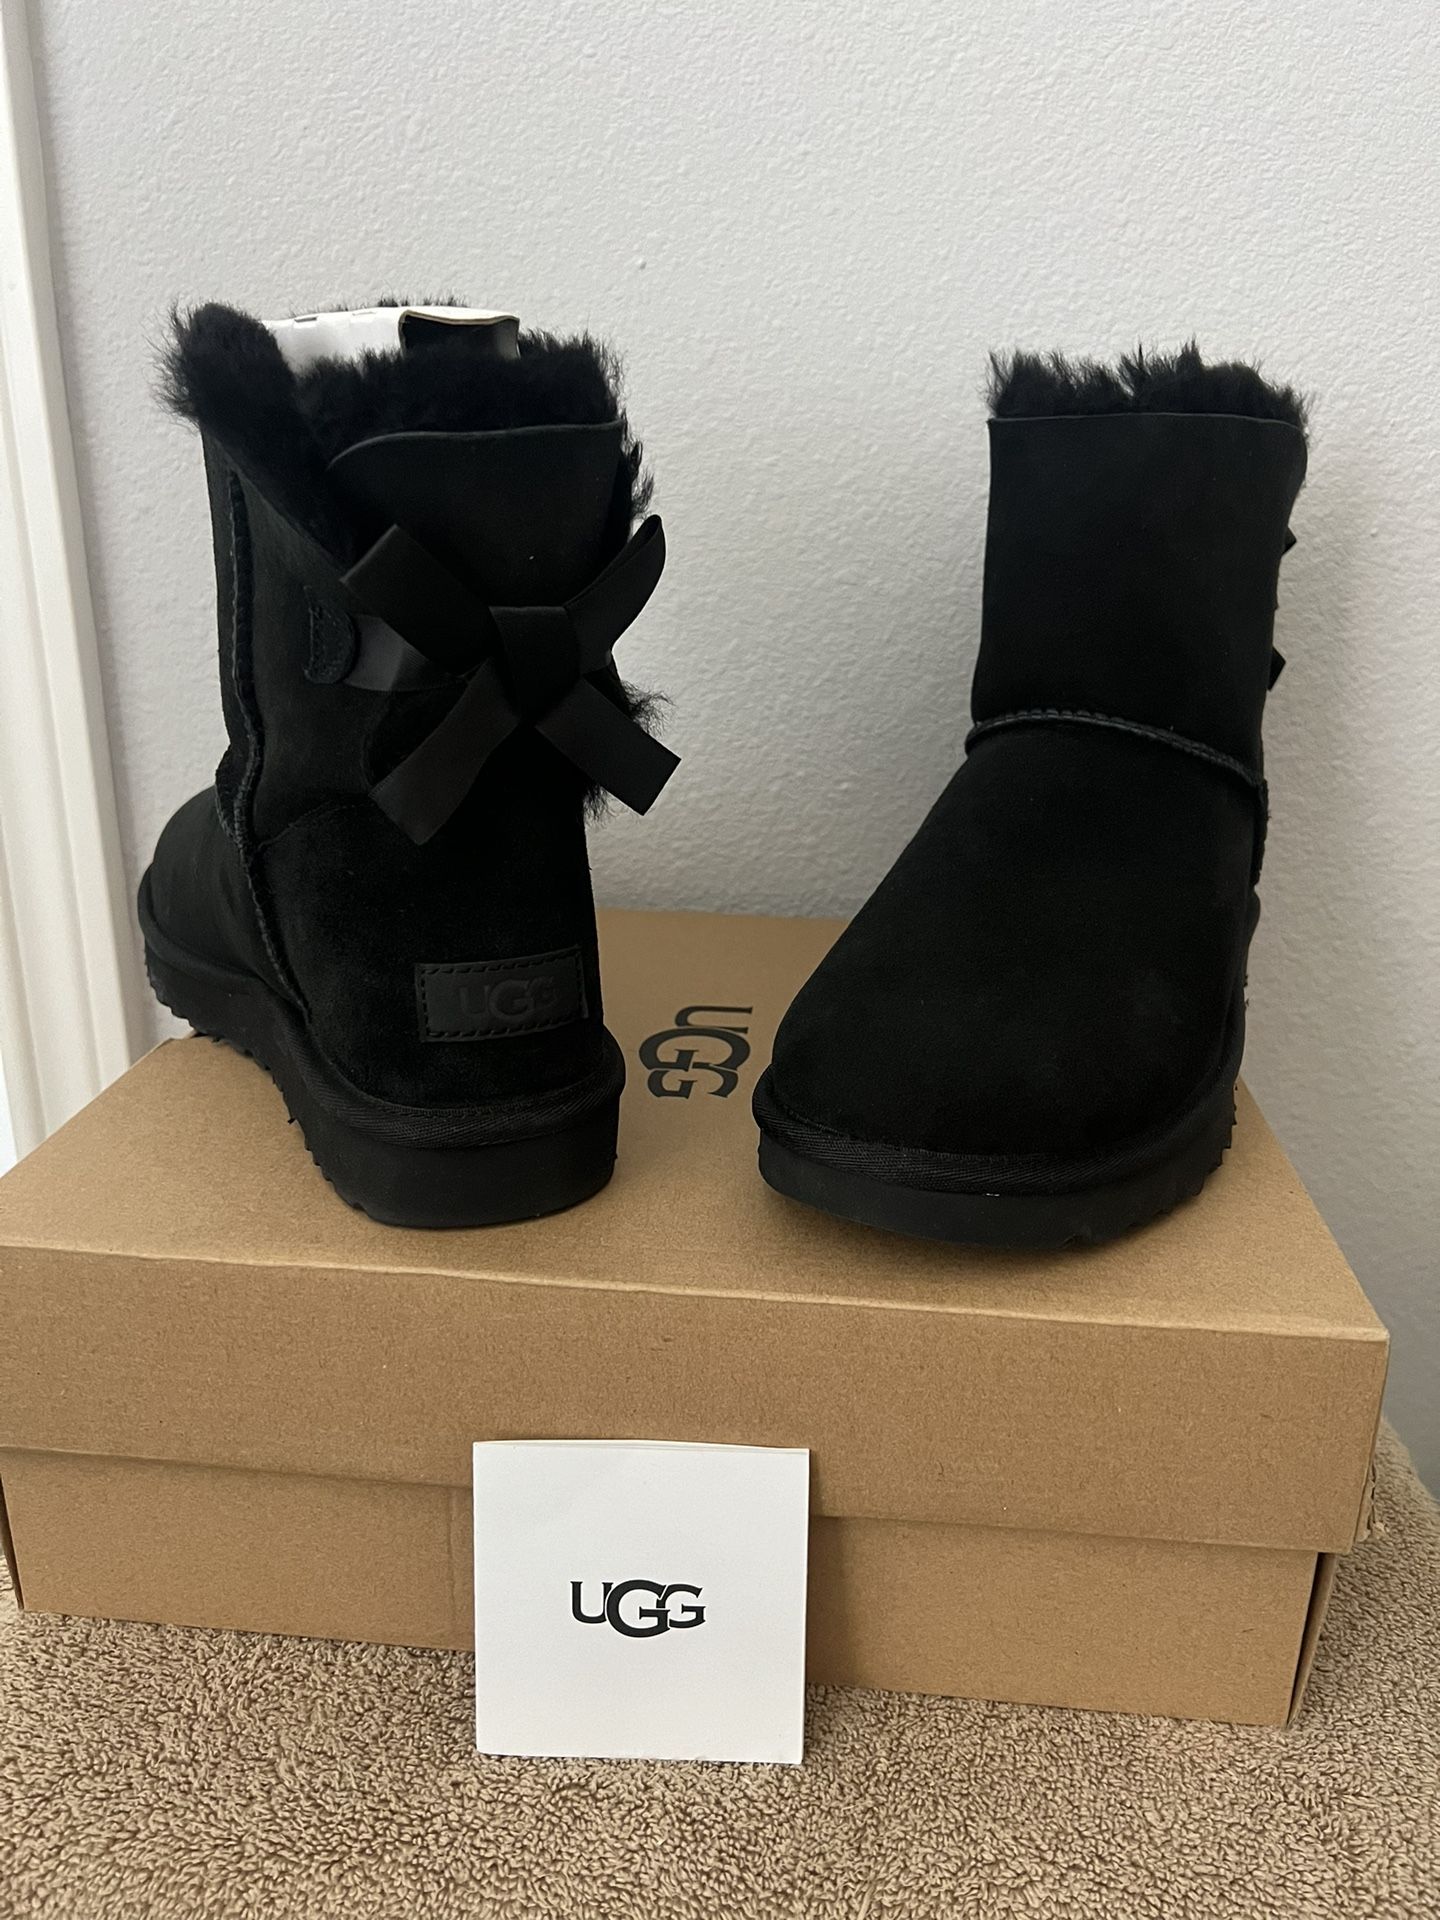 New Ugg Woman’s Size’s 7 8 9 Mini Bailey  Bow ll Black Size 9 